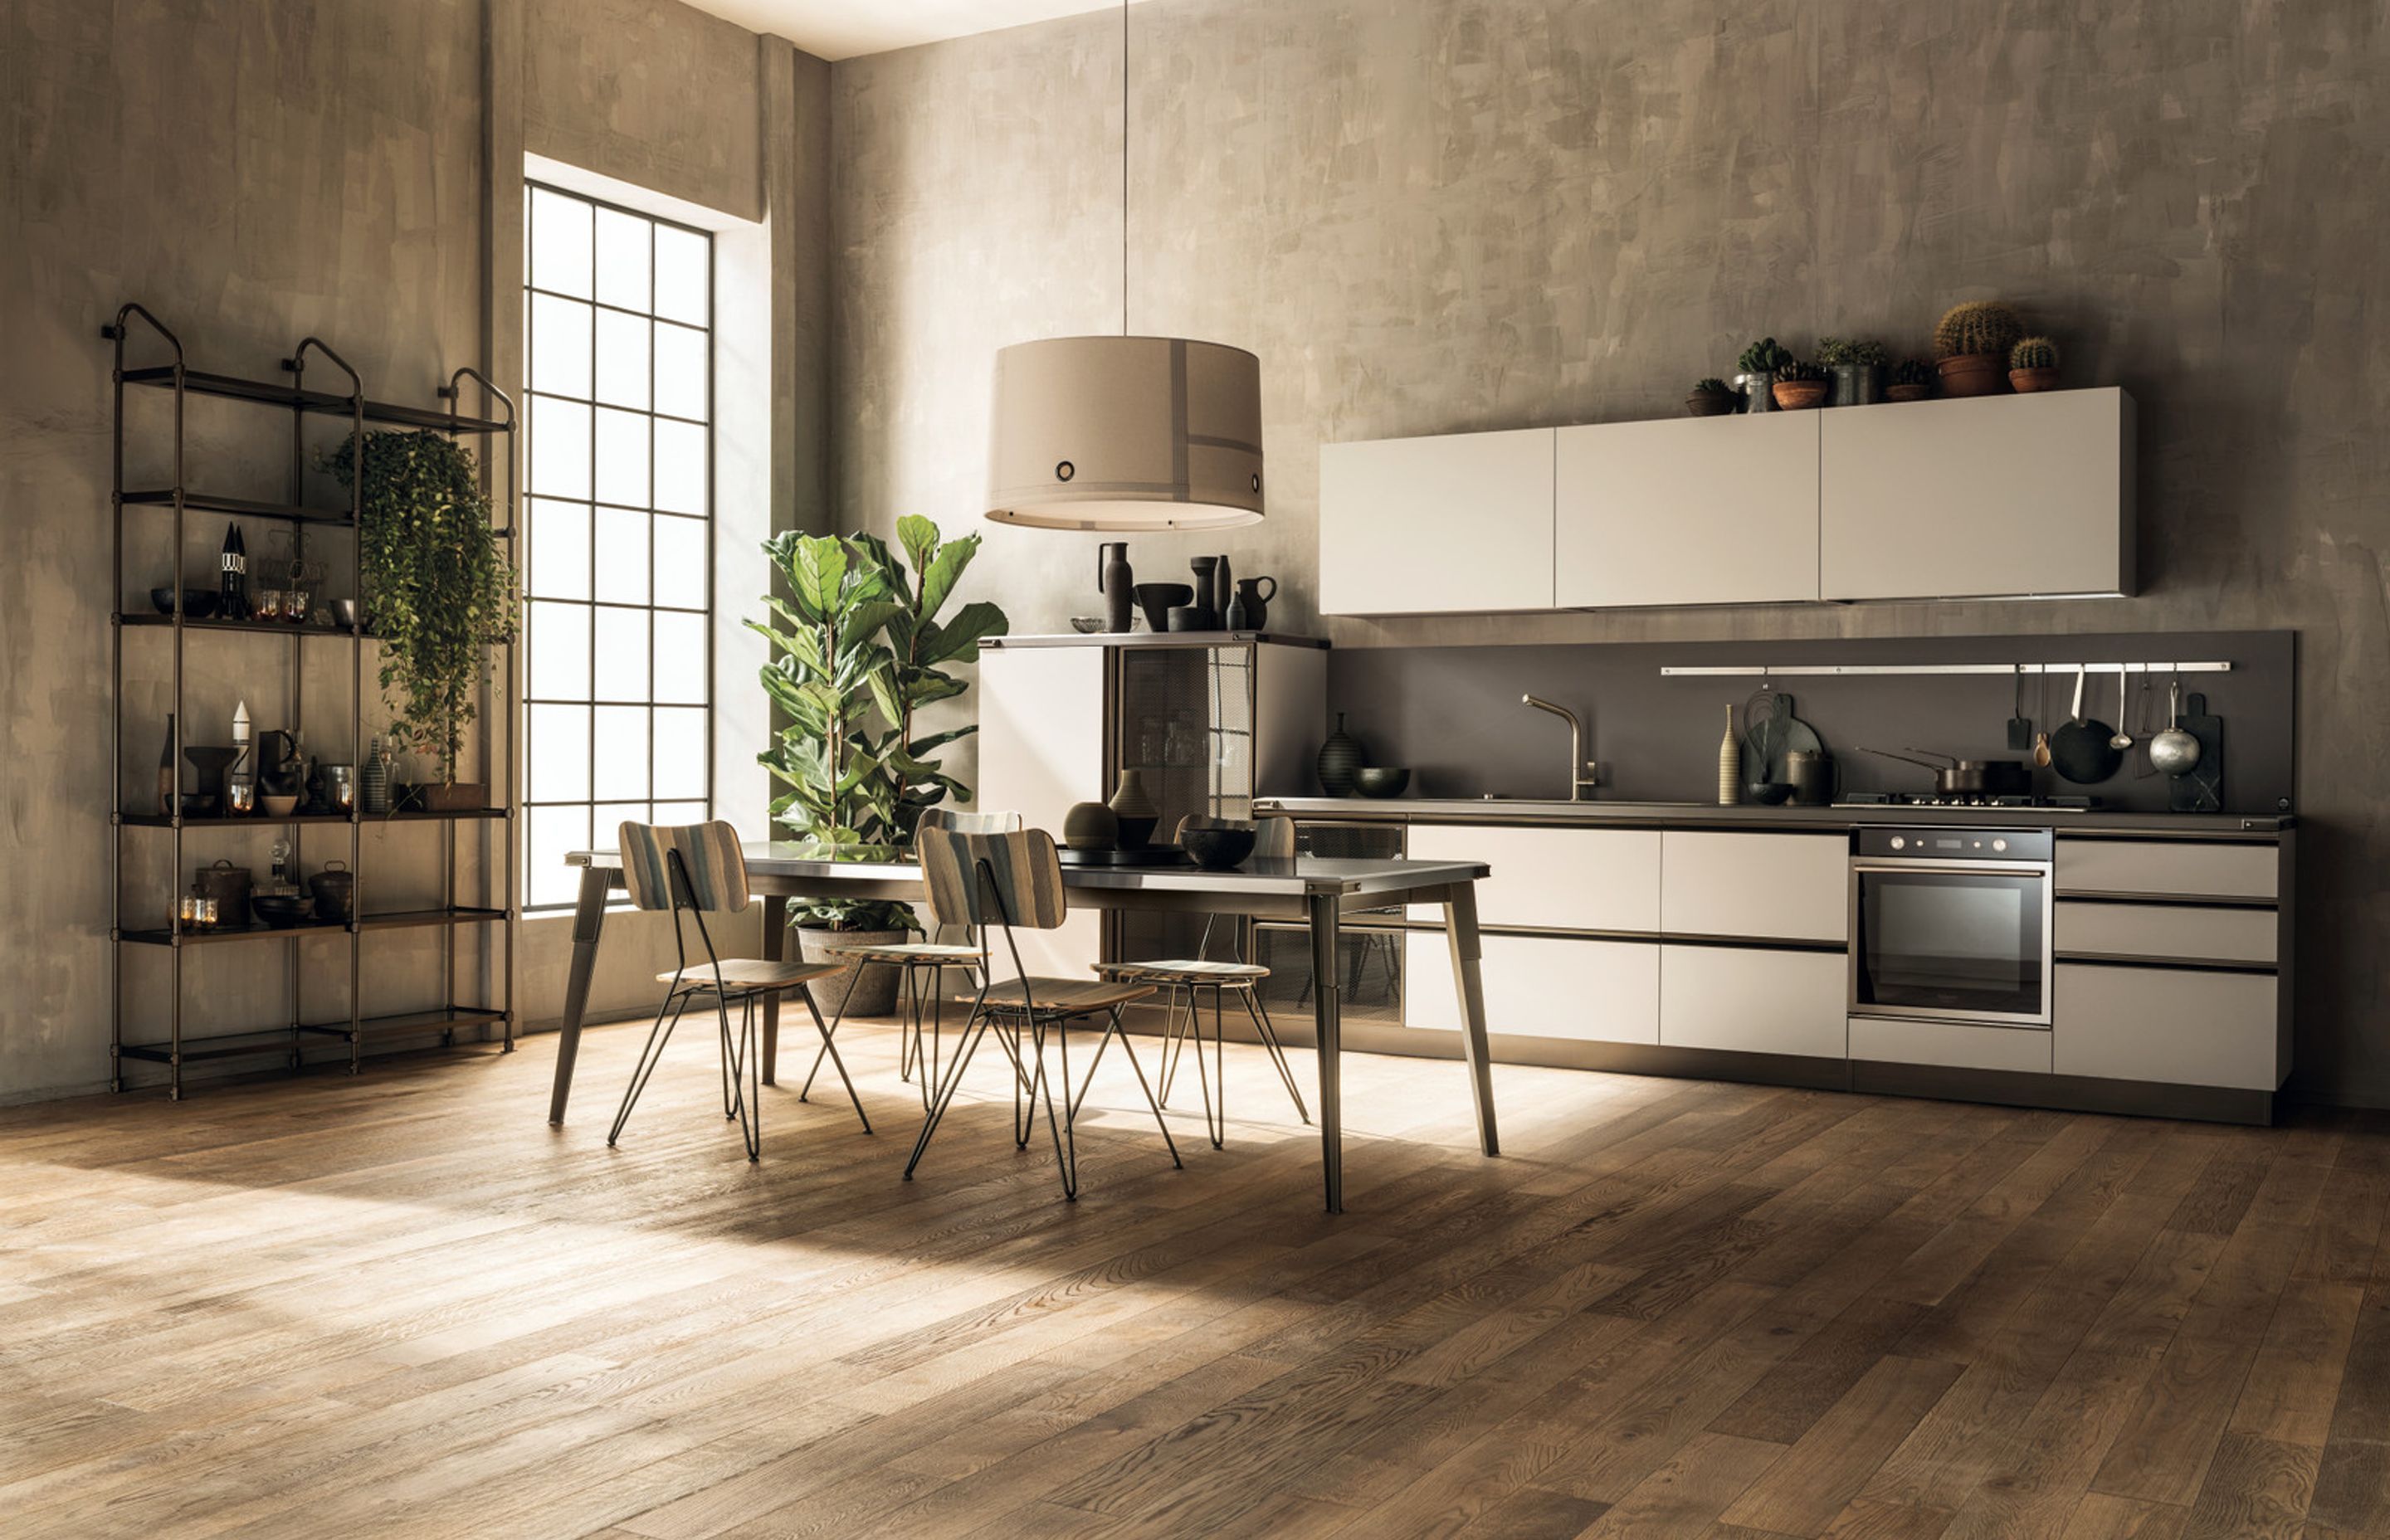 Simplicity, without foregoing Diesel style: Satin finish Moka Lapitec® top and the version in Smoky Glass with black mesh, combined with the base unit and mediumheight unit doors, distinguish this kitchen in Soft Beige decorative melamine.